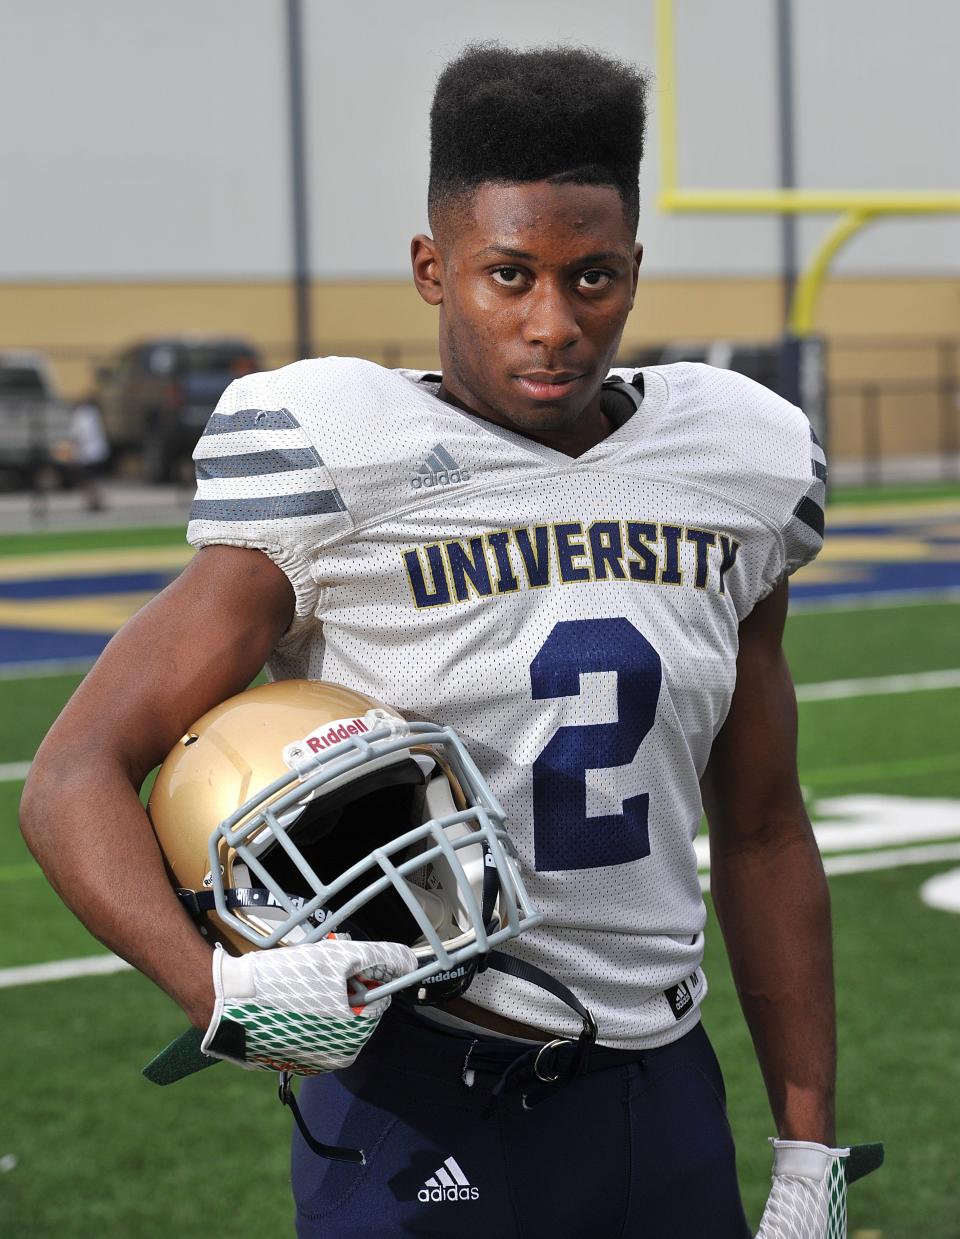 University Christian running back Otis Anderson Jr. is pictured on Dec. 1, 2015. Anderson won back-to-back Florida High School Athletic Association championships at UC, and later played college football at UCF and NFL football with the Los Angeles Rams.